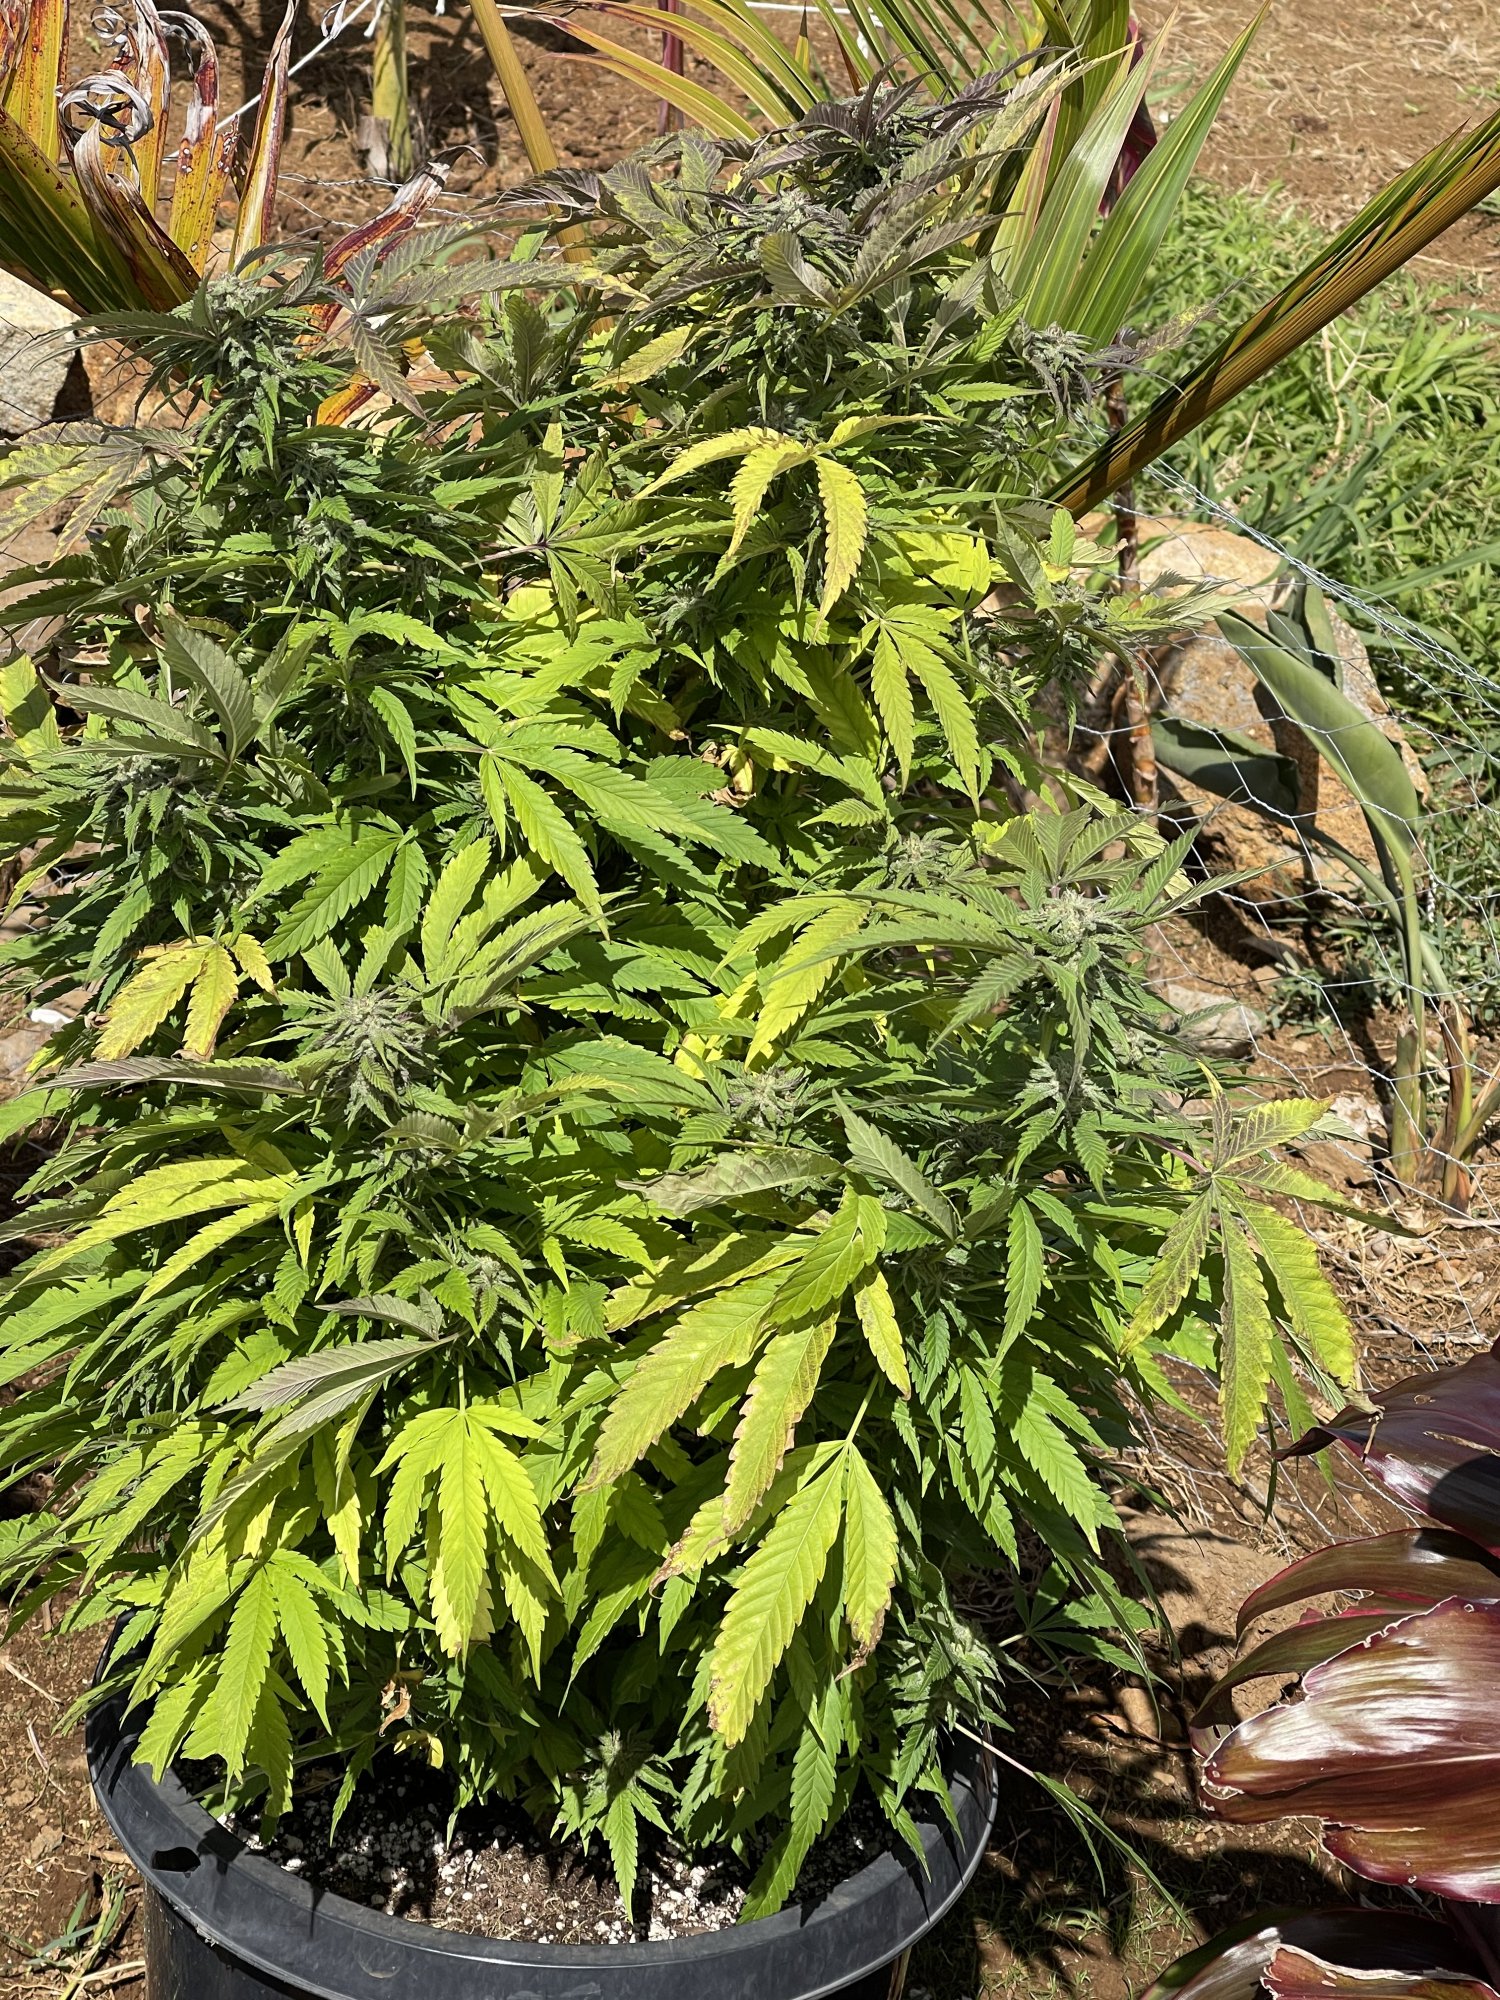 54f and windy cause this in my outdoor grow 2